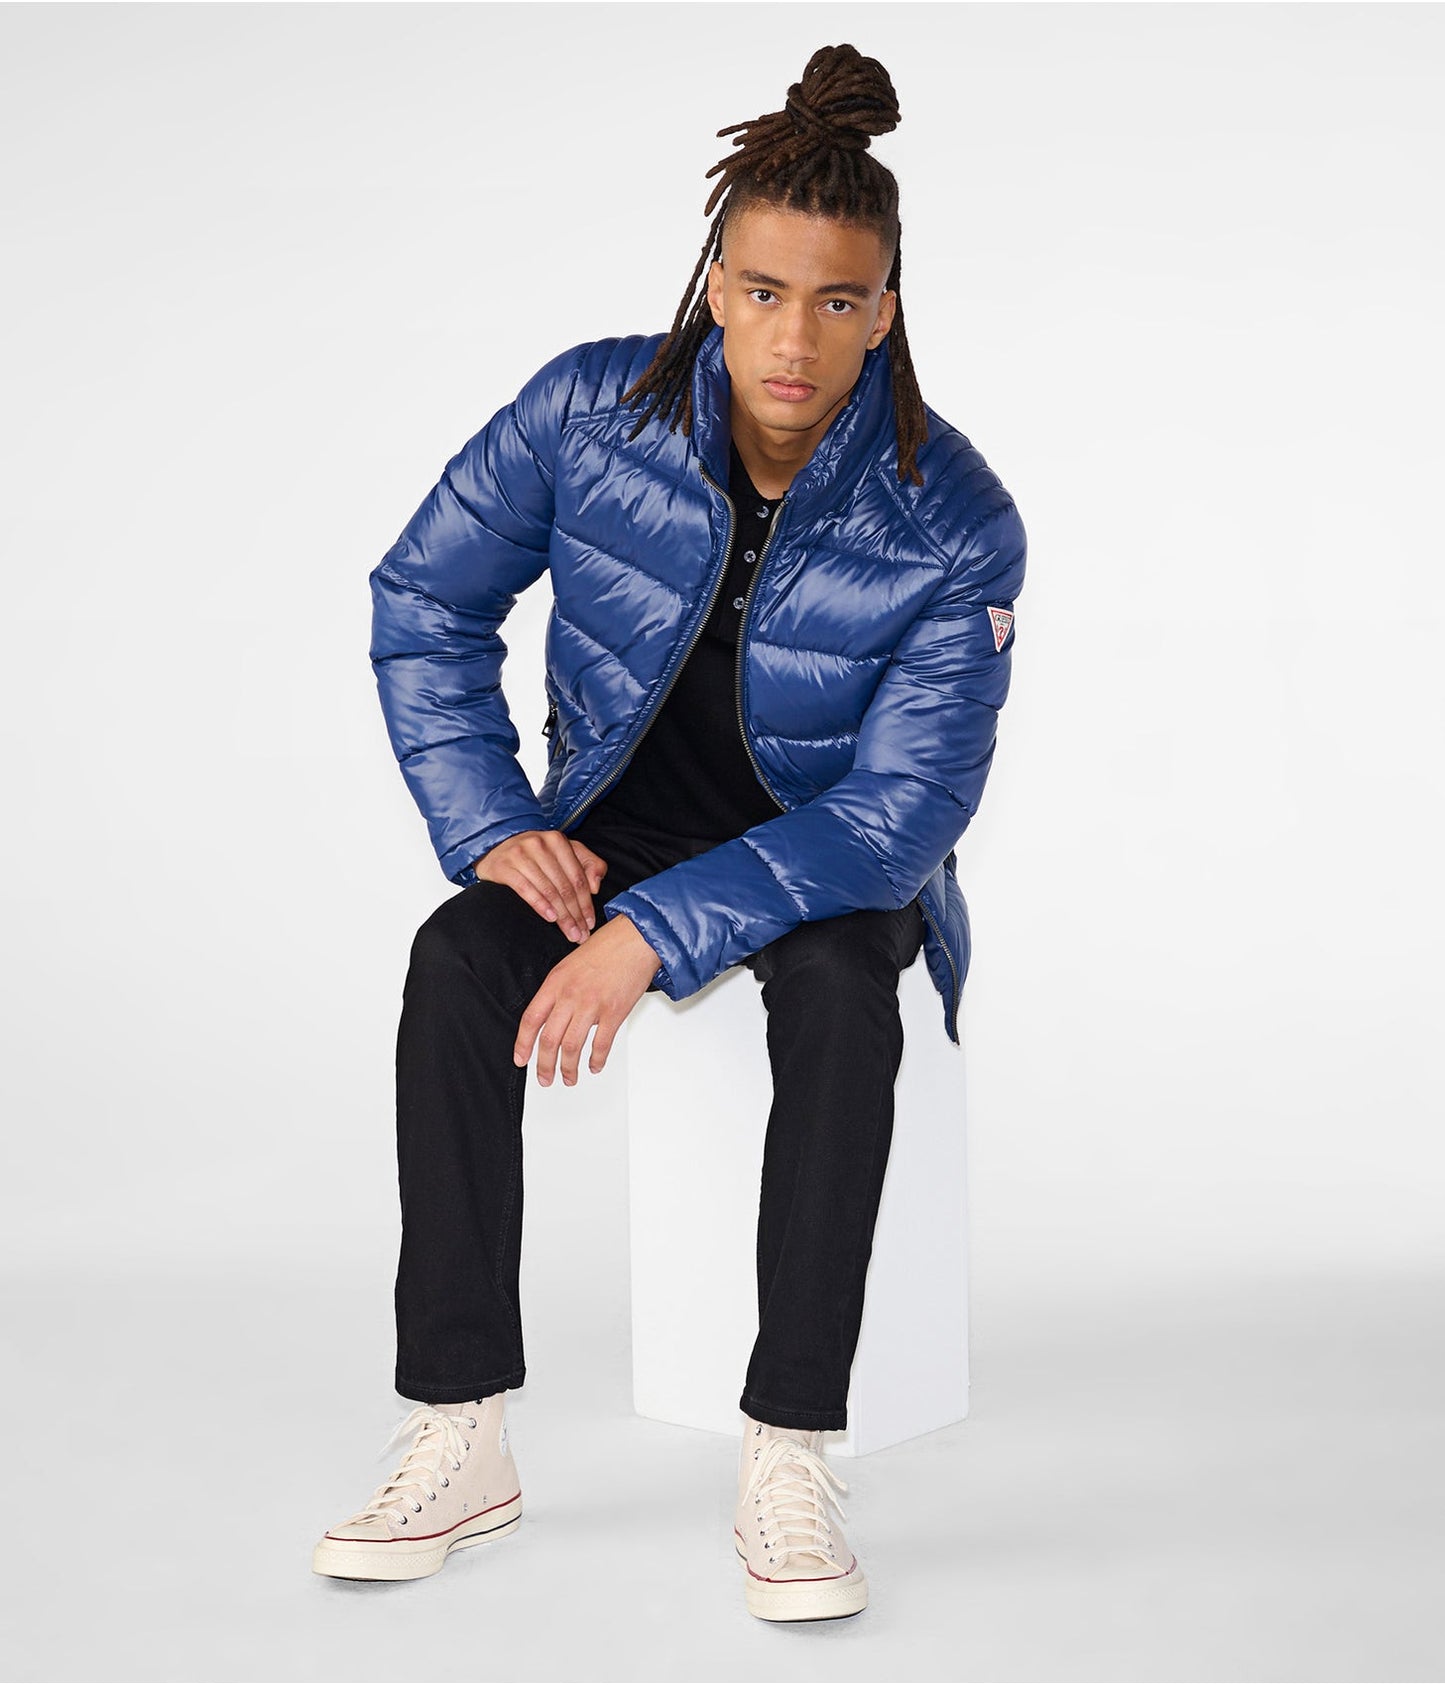 Men's Leather Puffer Jacket In Blue With Removable Hood